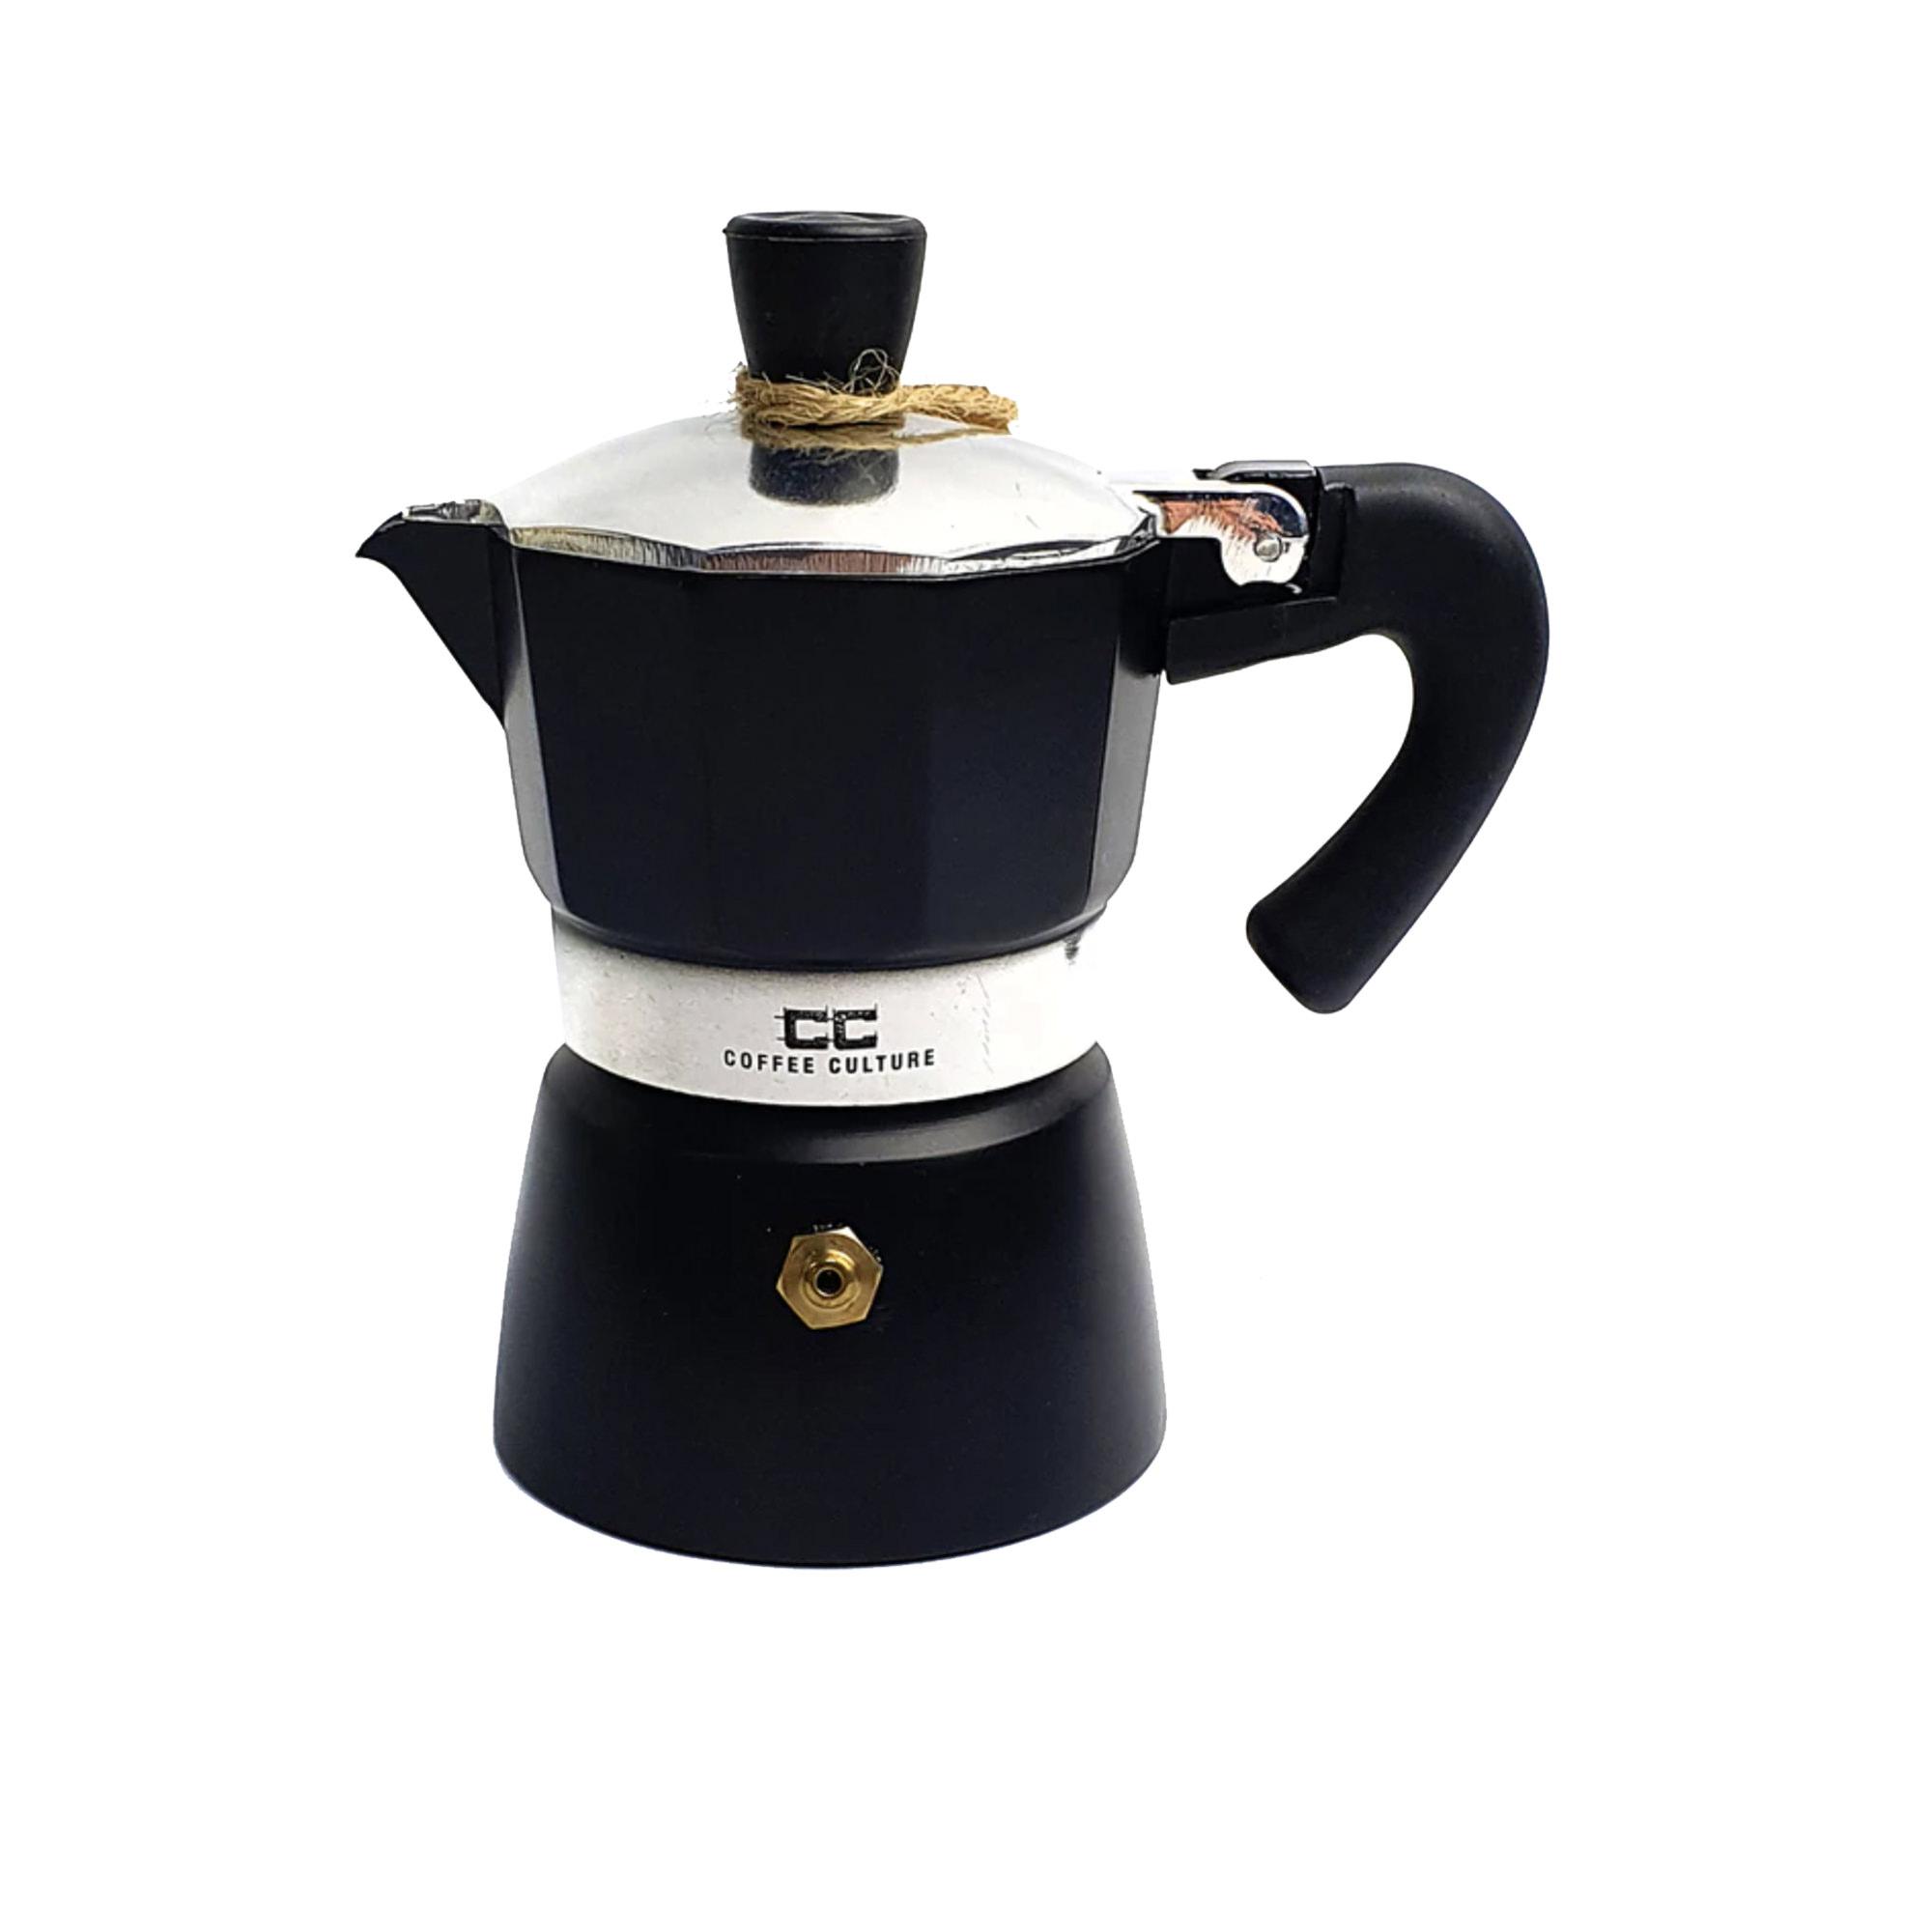 Coffee Culture Coffee Maker 1 Cup Black Image 1